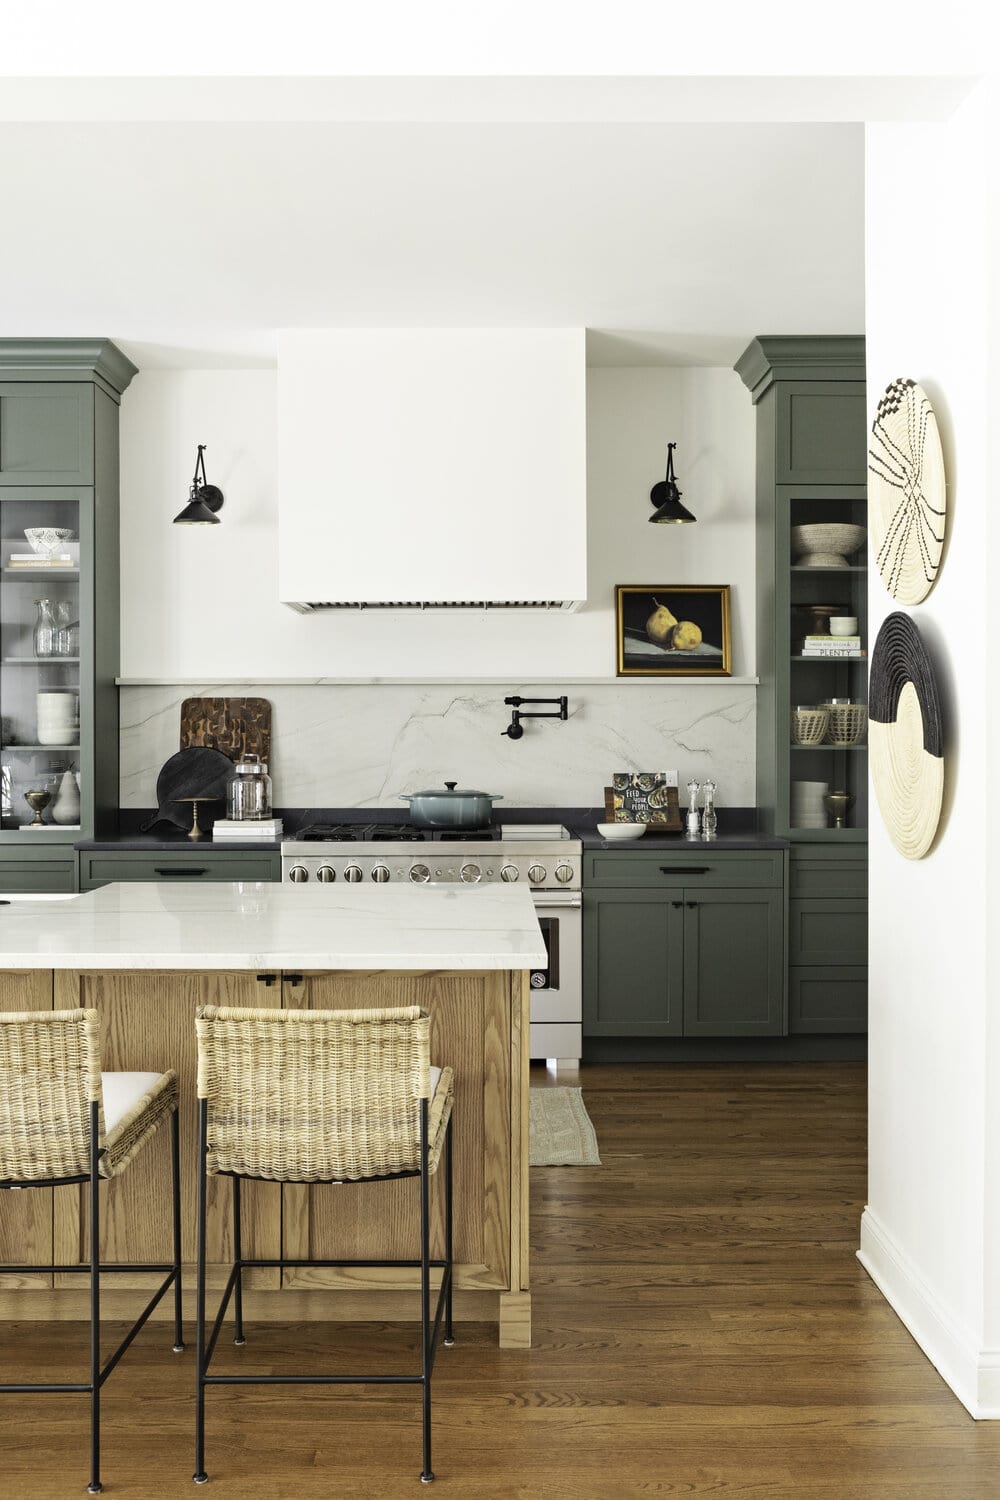 sherwin williams pewter green kitchen cabinets